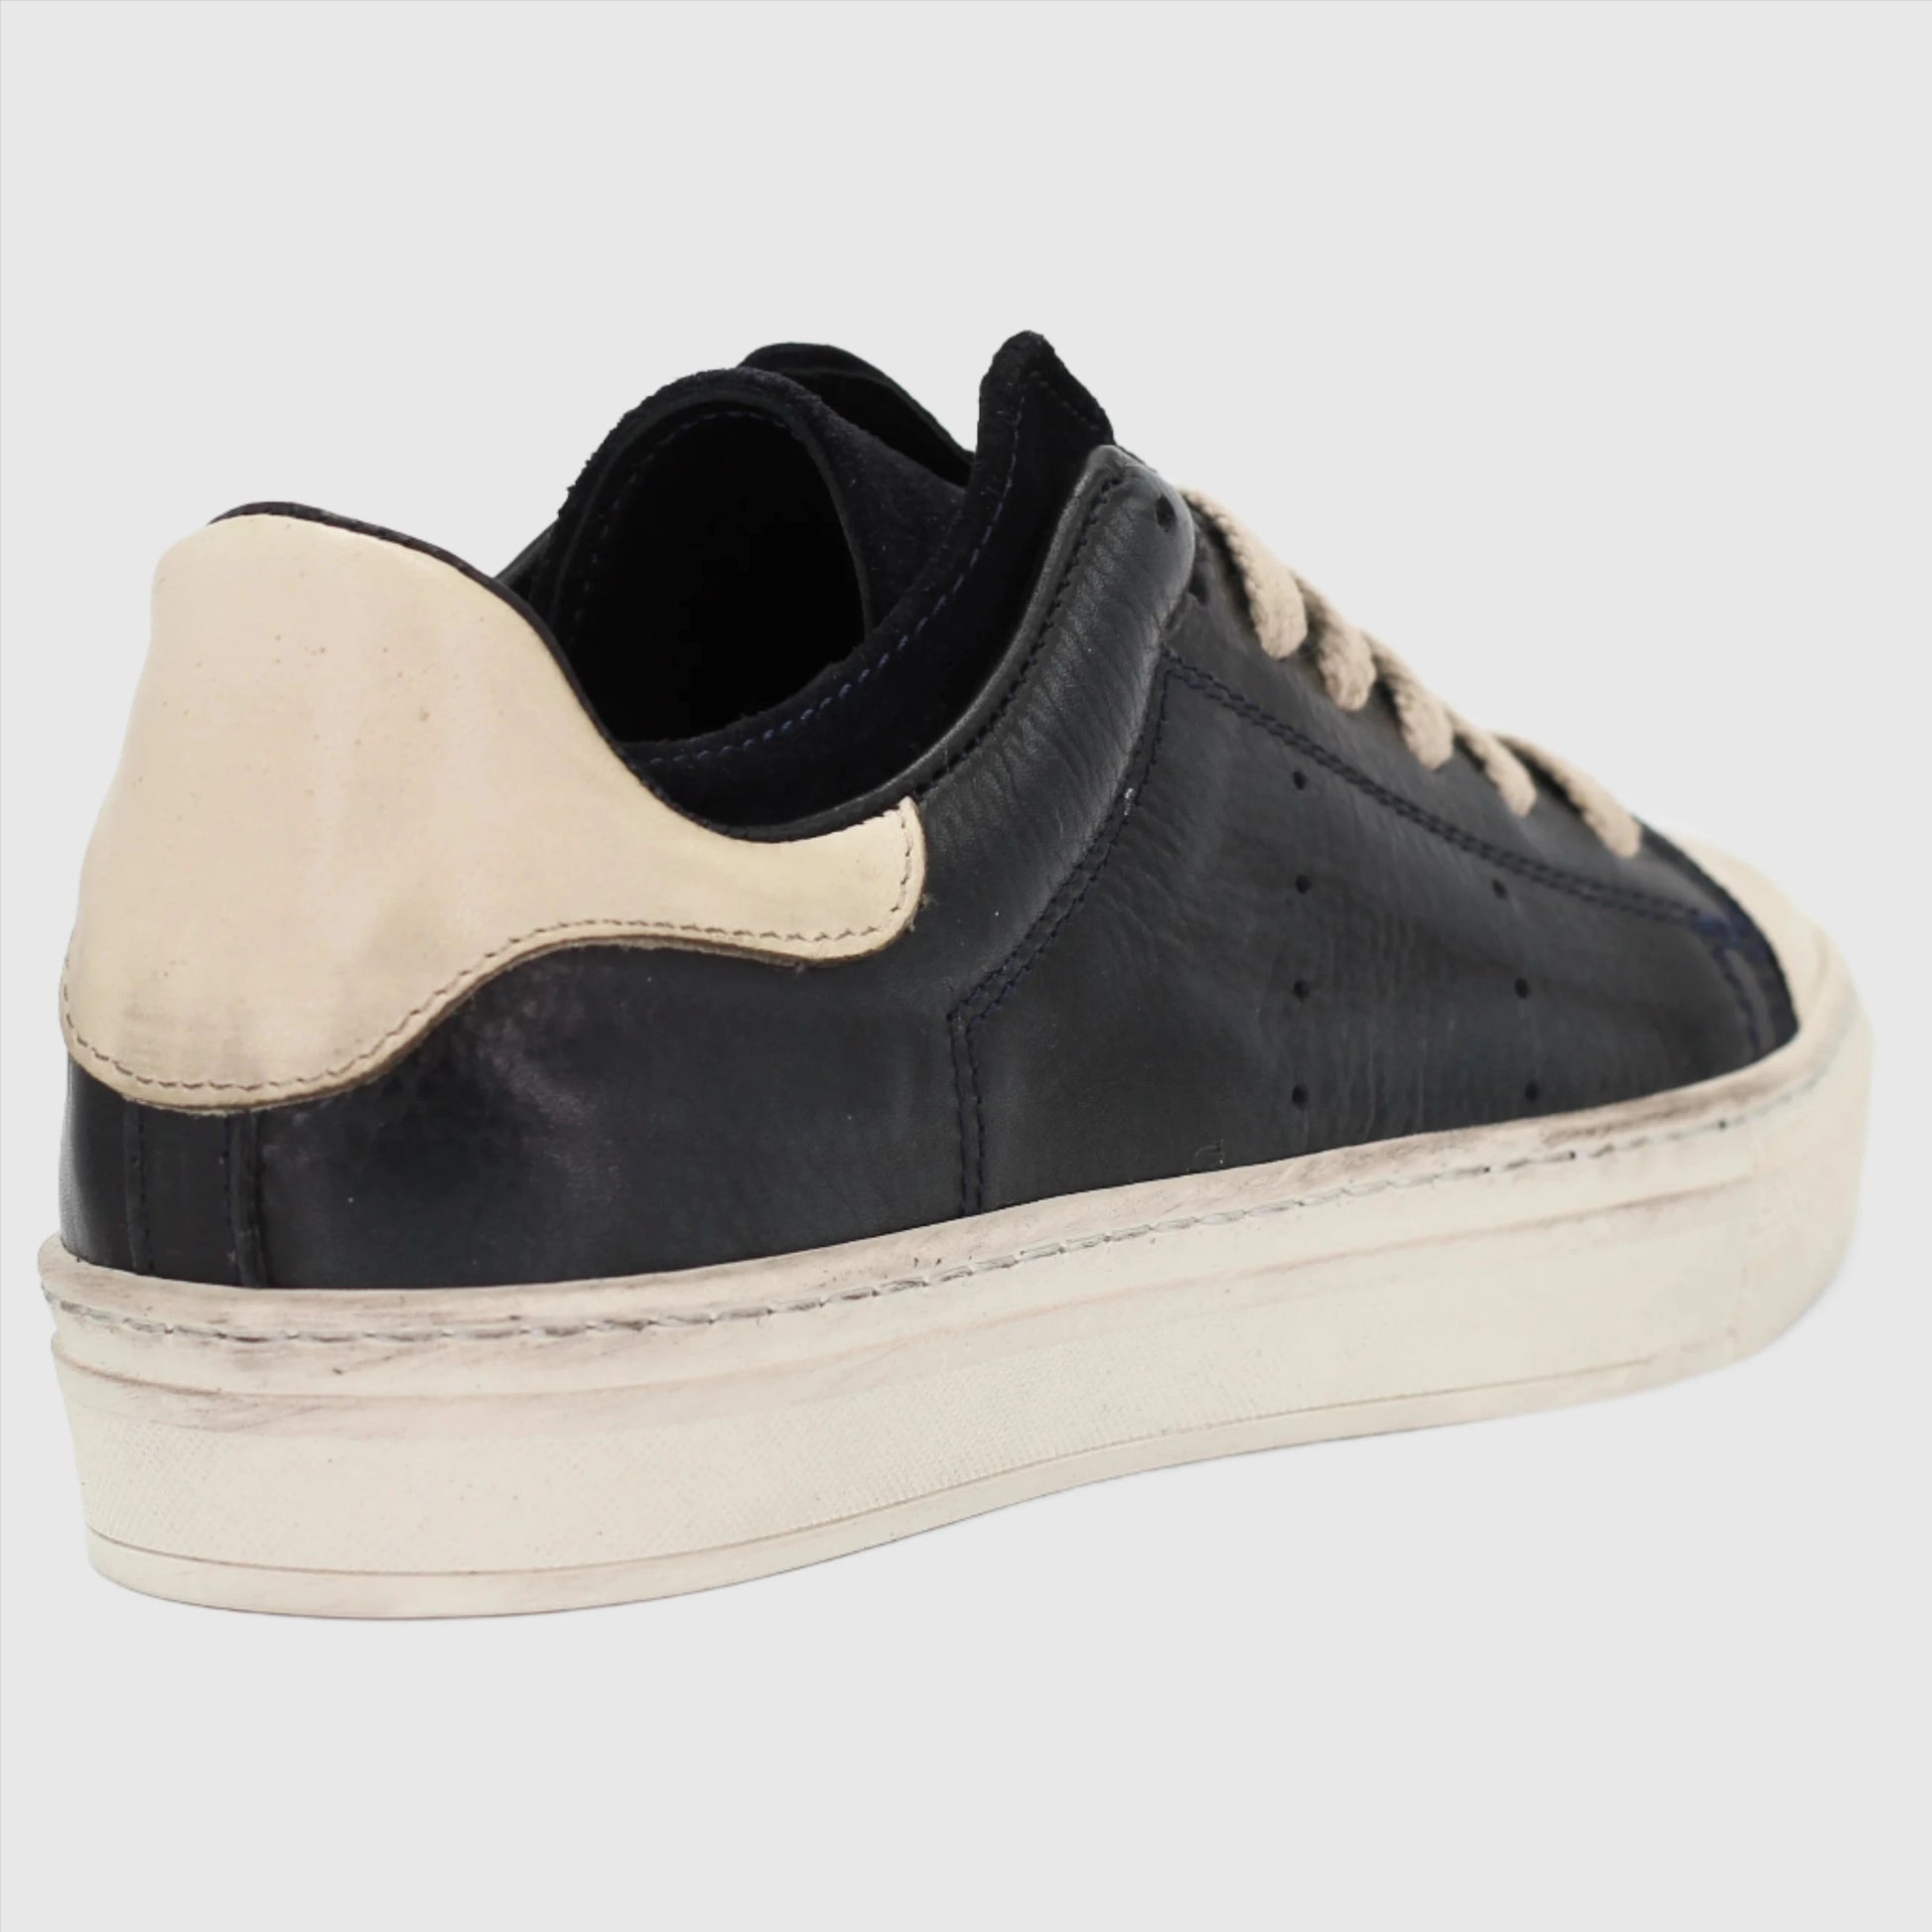 Shop Handmade Italian Leather Sneaker in Blue (GRD700/1) or browse our range of hand-made Italian shoes in leather or suede in-store at Aliverti Cape Town, or shop online. We deliver in South Africa & offer multiple payment plans as well as accept multiple safe & secure payment methods.